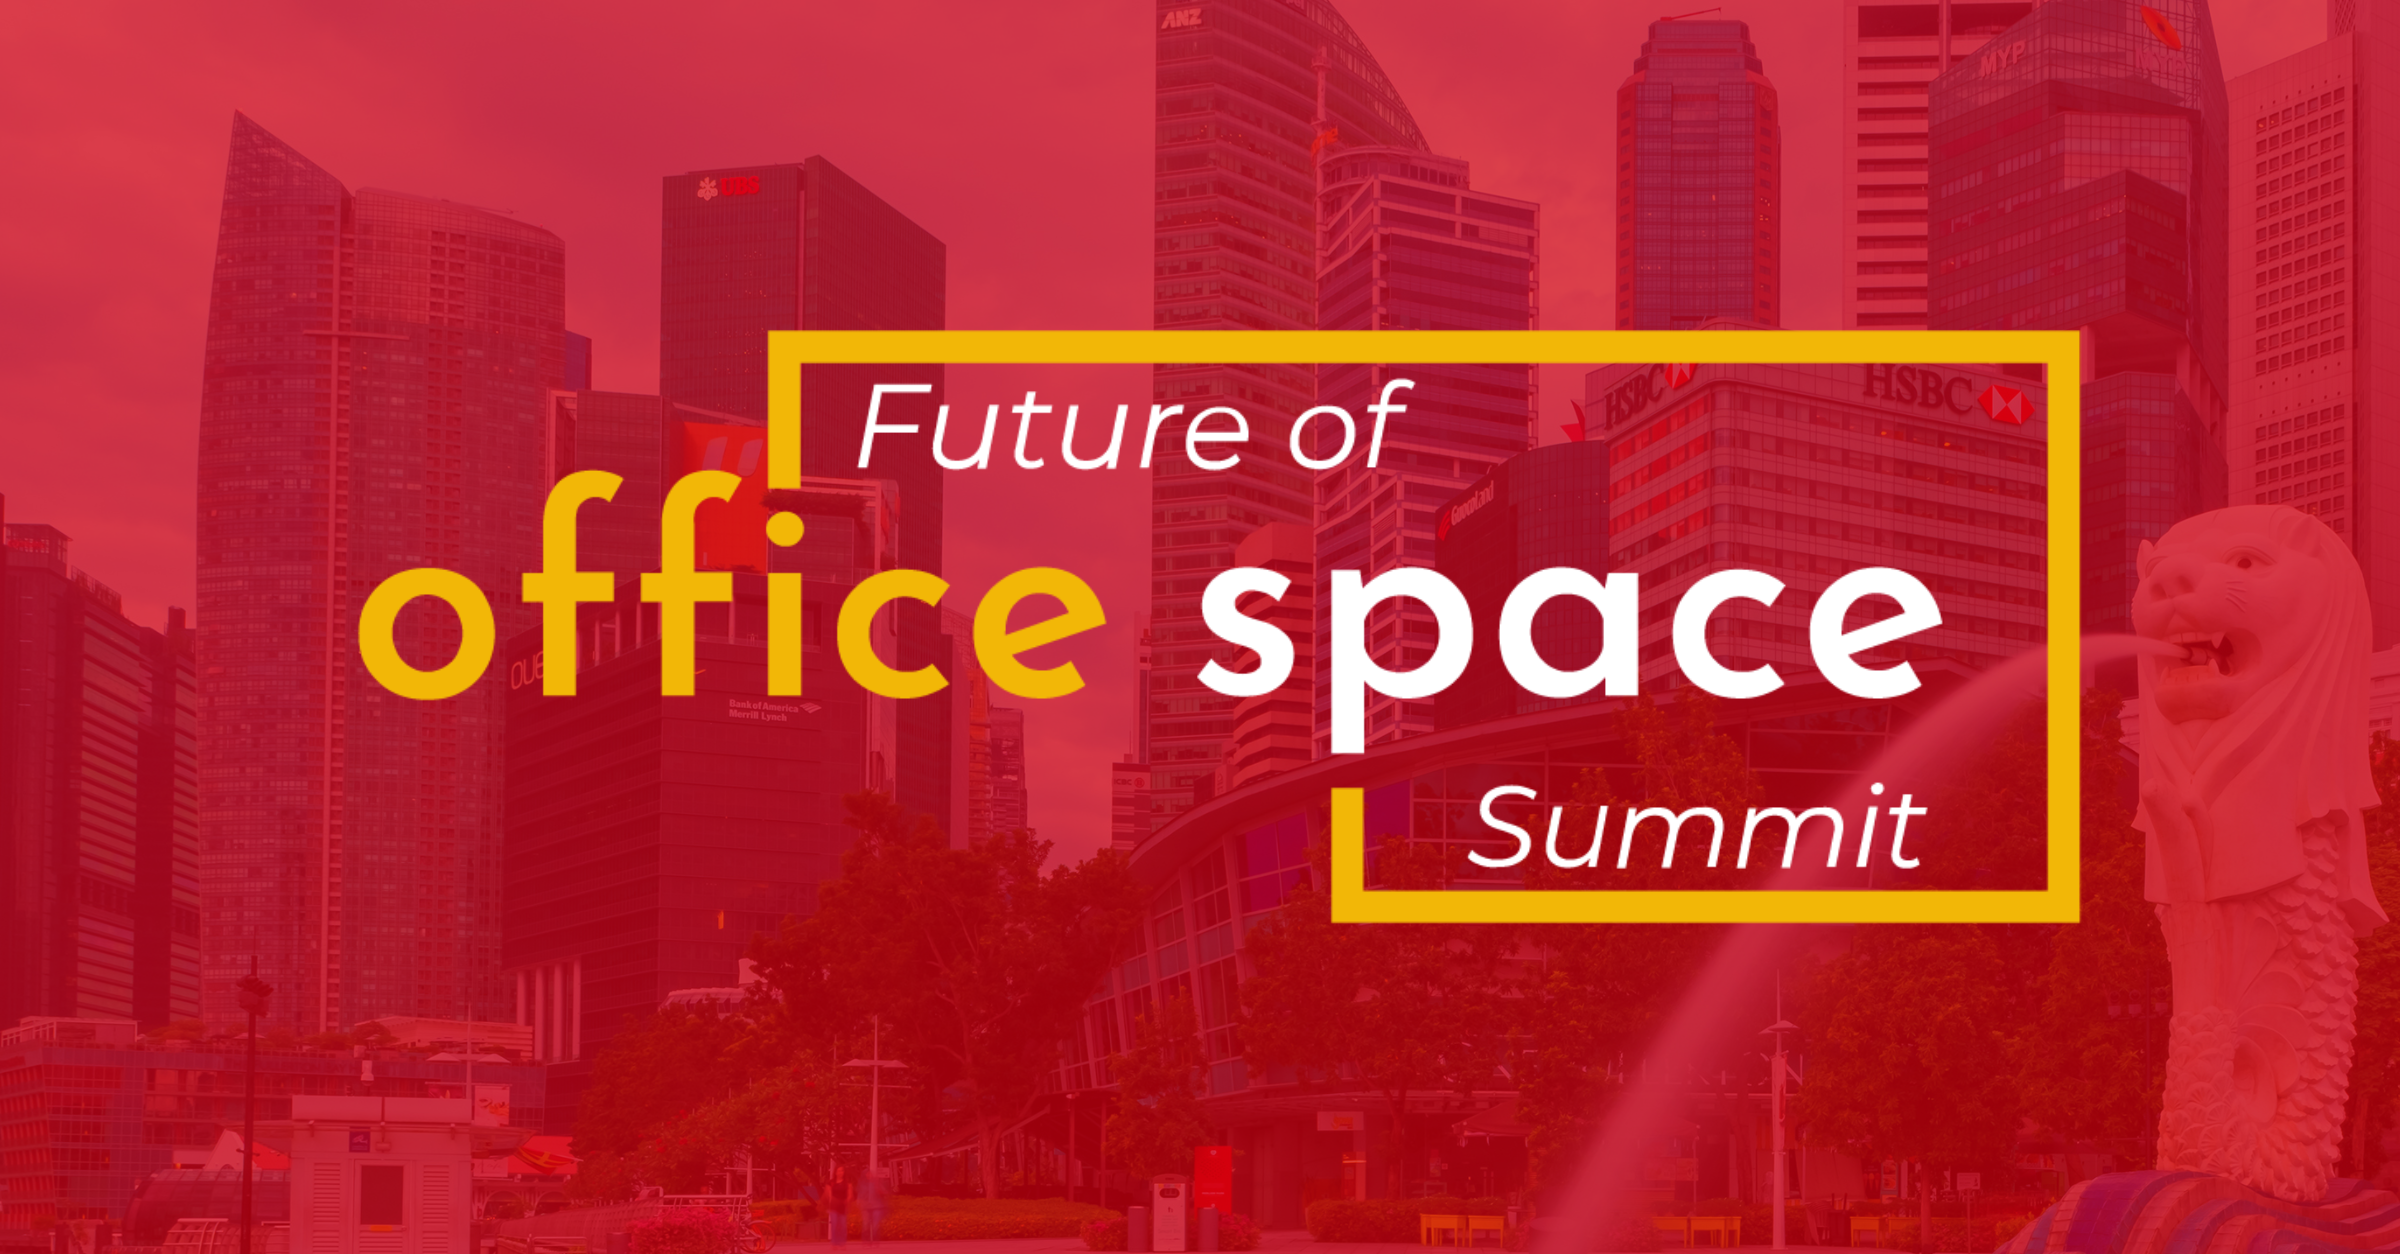 Future of Office Space Summit: 12 October 2022